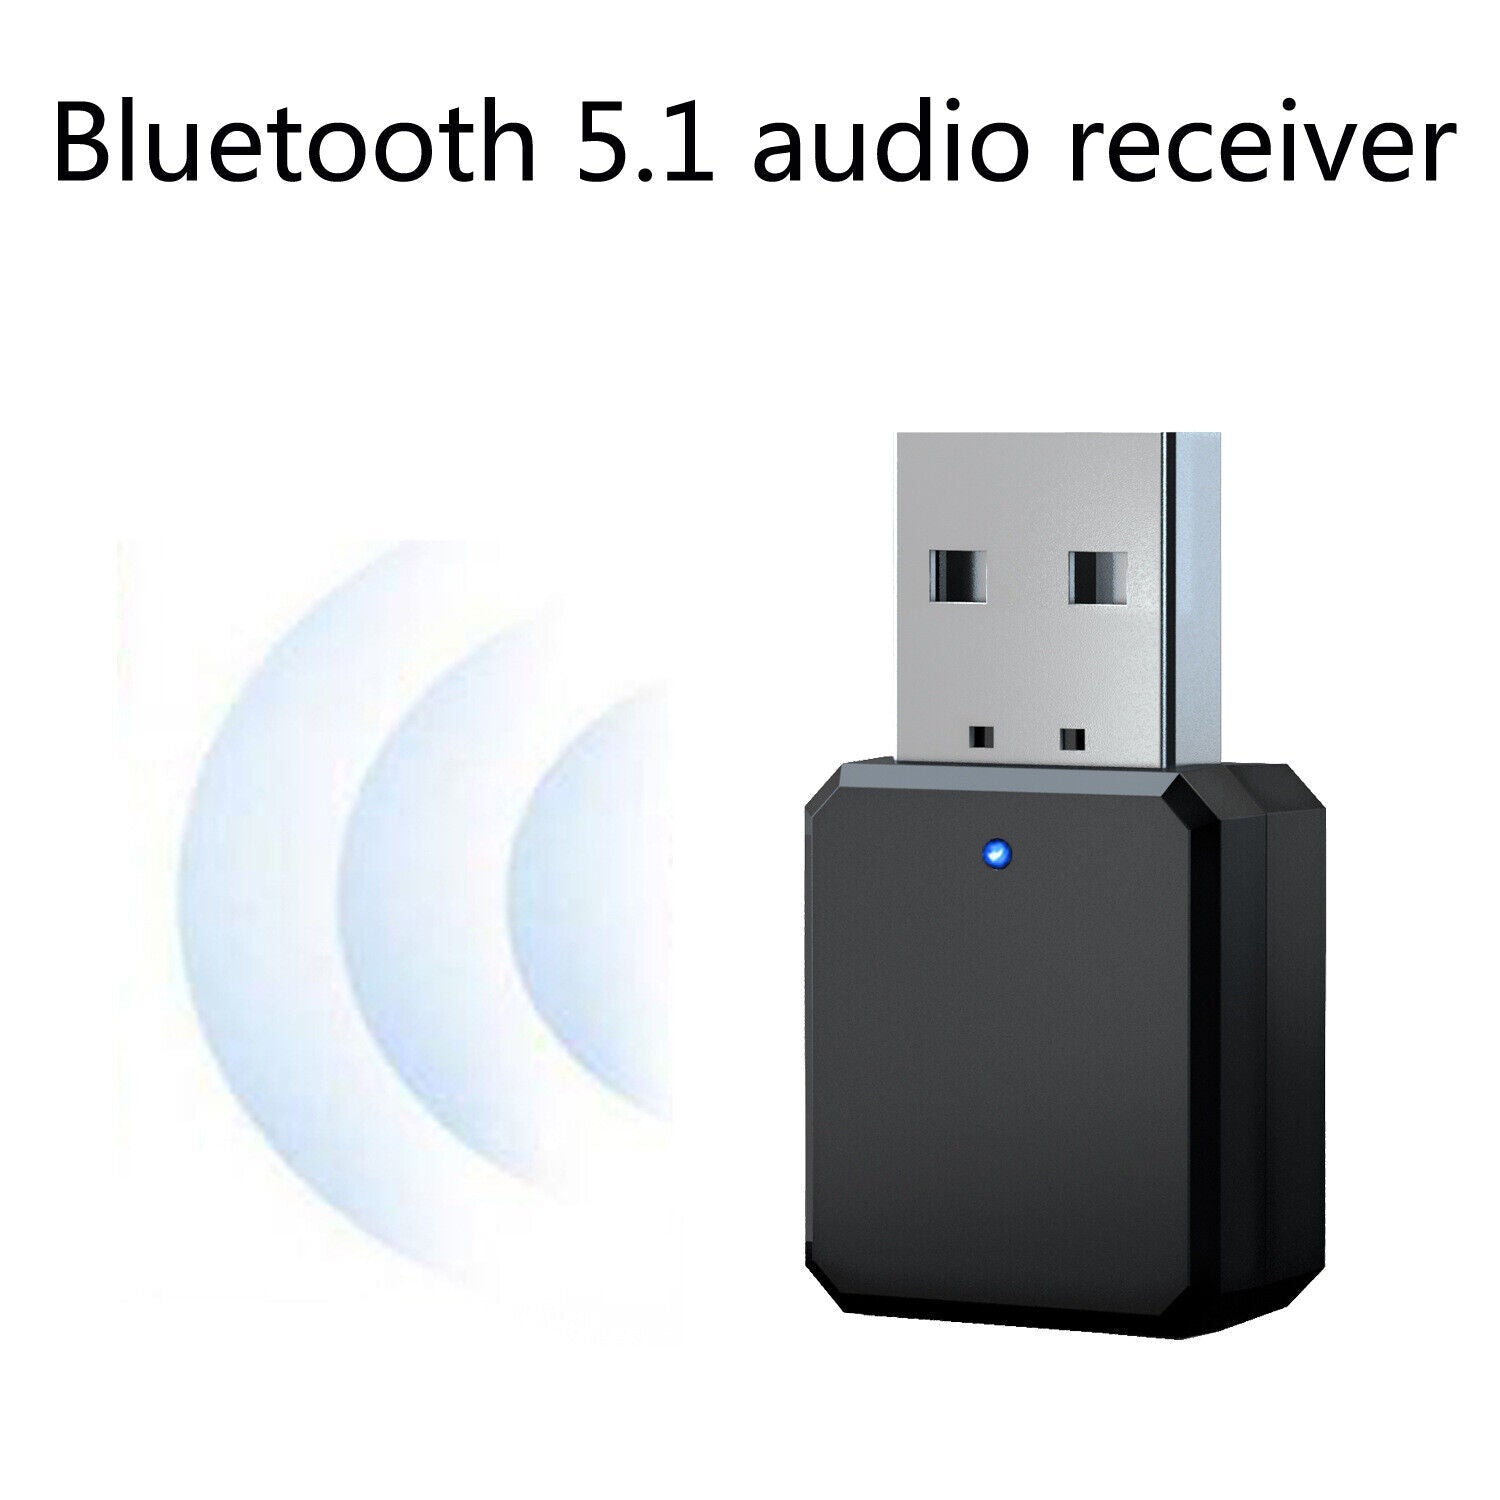 HXT Mini Bluetooth BT5.1 Dongle - I Gaming Computer | Australia Wide Shipping | Buy now, Pay Later with Afterpay, Klarna, Zip, Latitude & Paypal